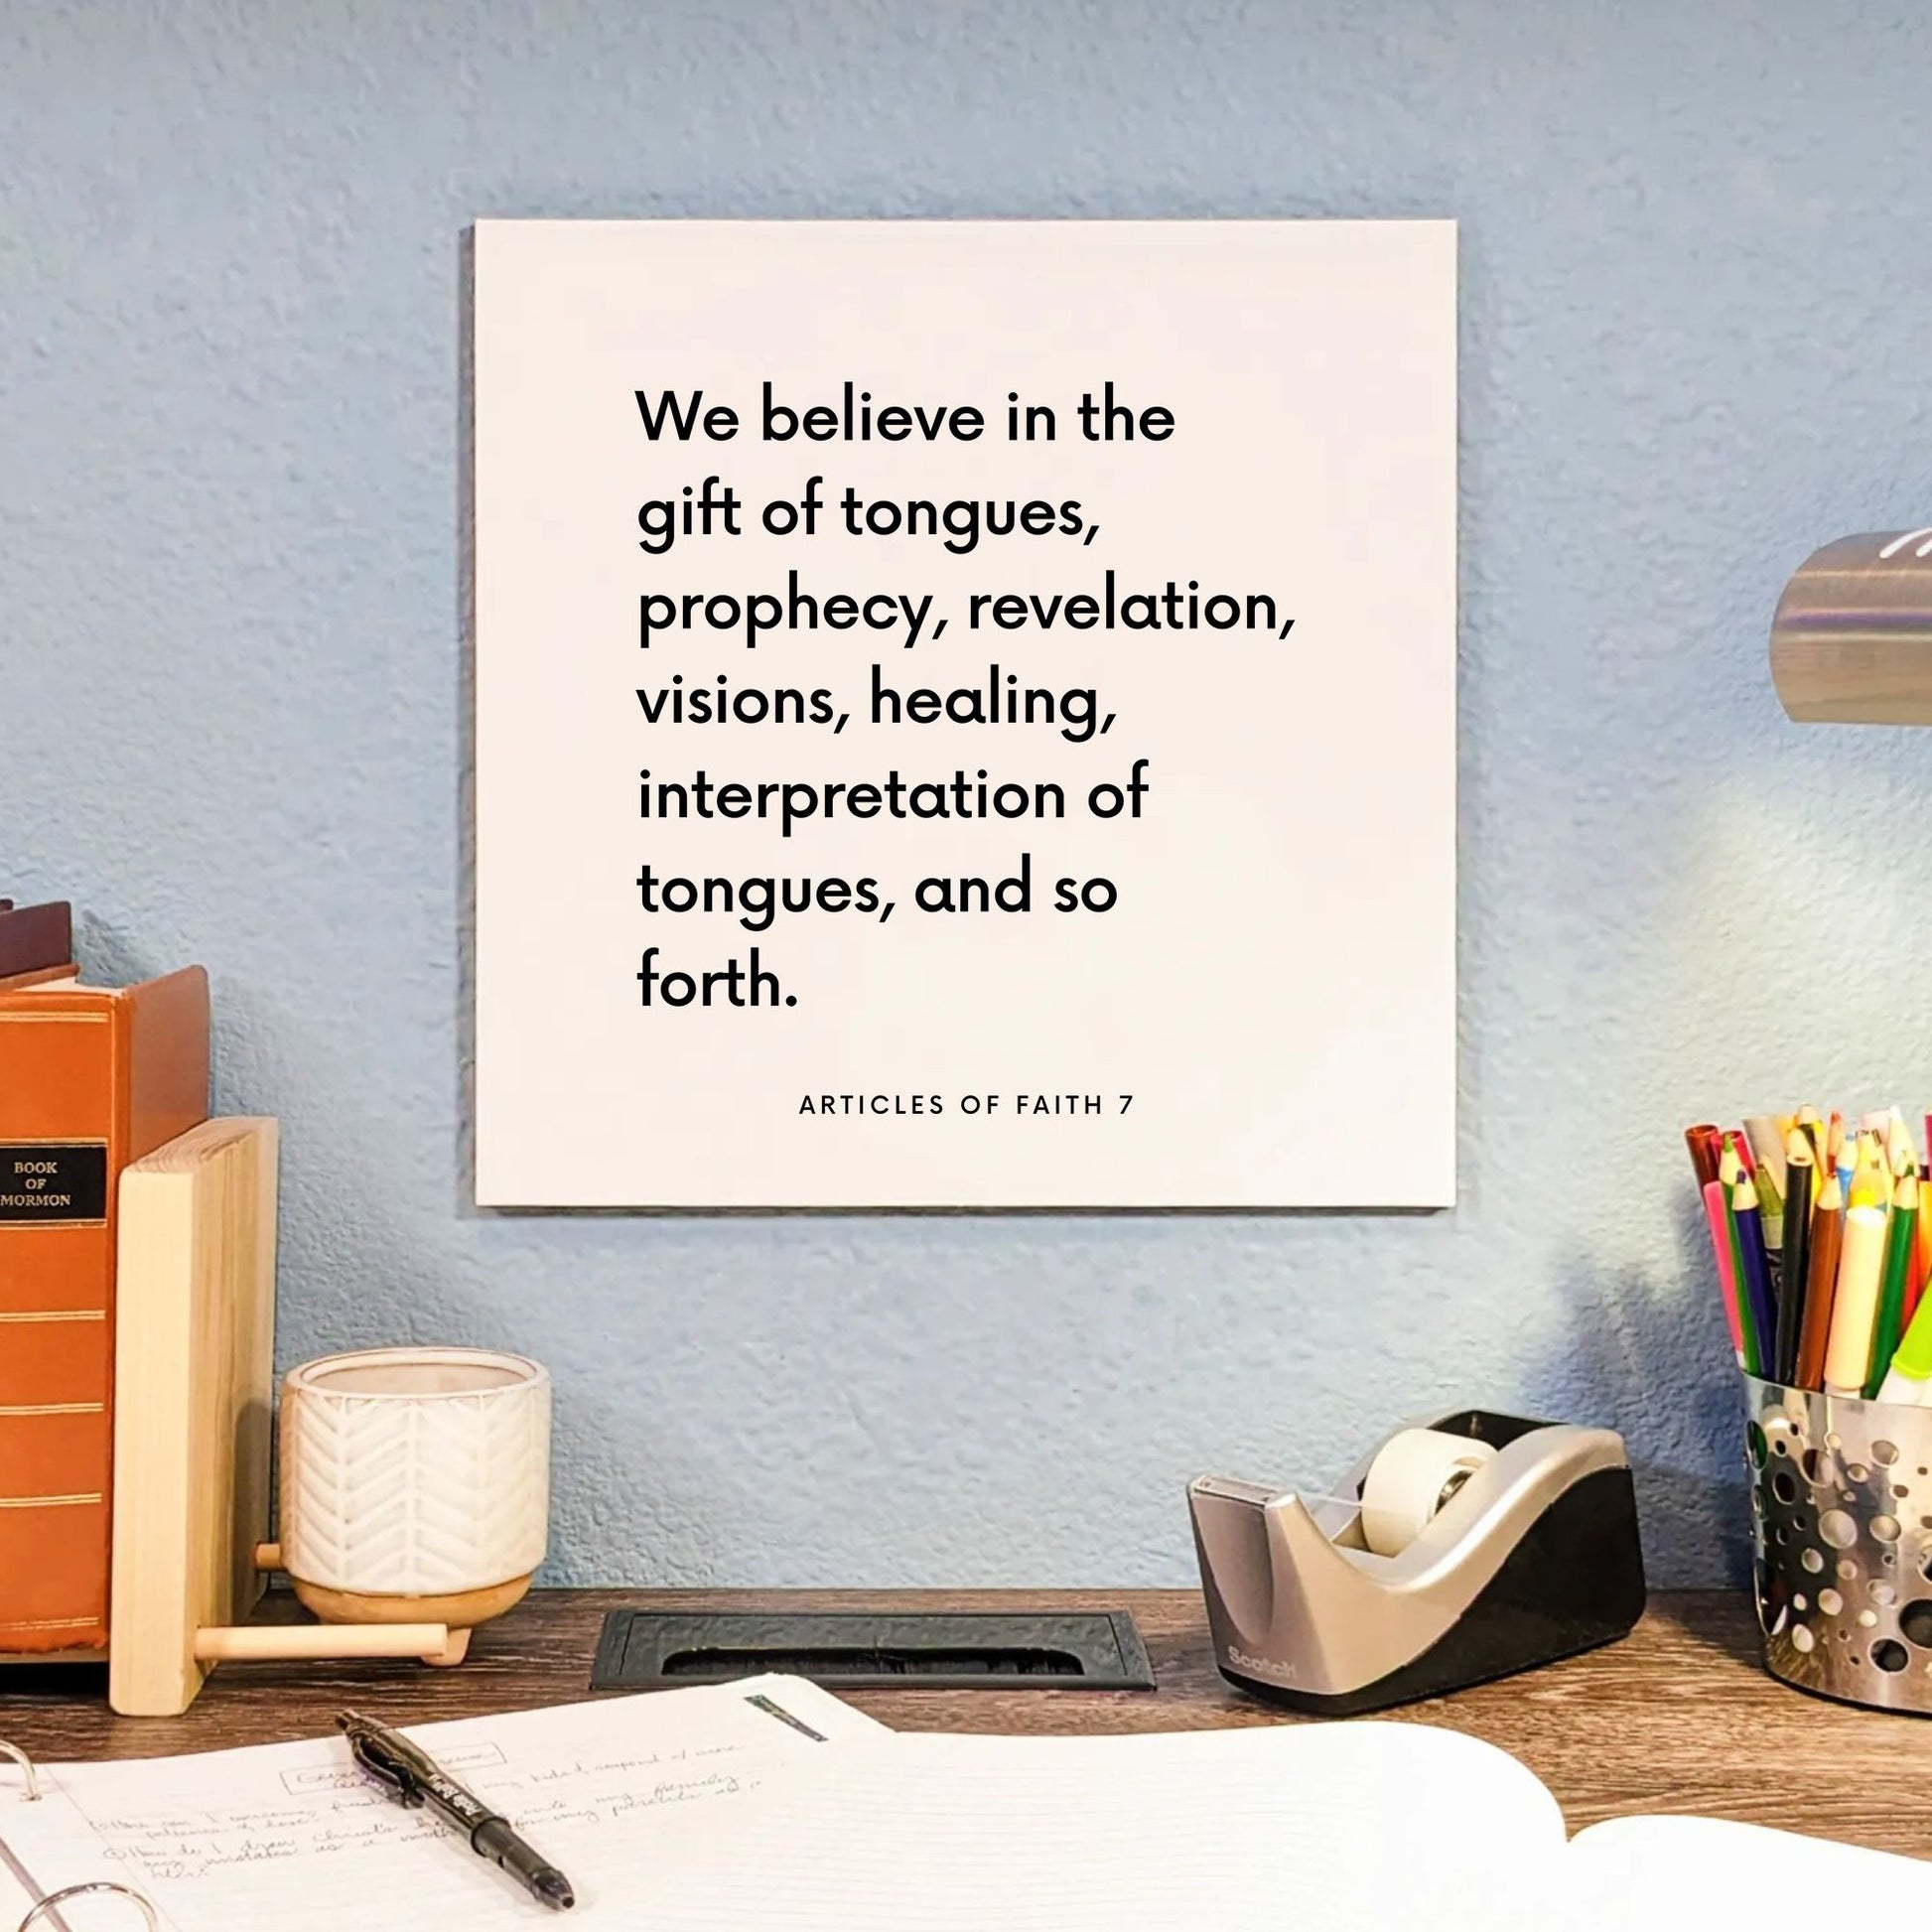 Desk mouting of the scripture tile for Articles of Faith 7 - "We believe in the gift of tongues, prophecy, revelation"